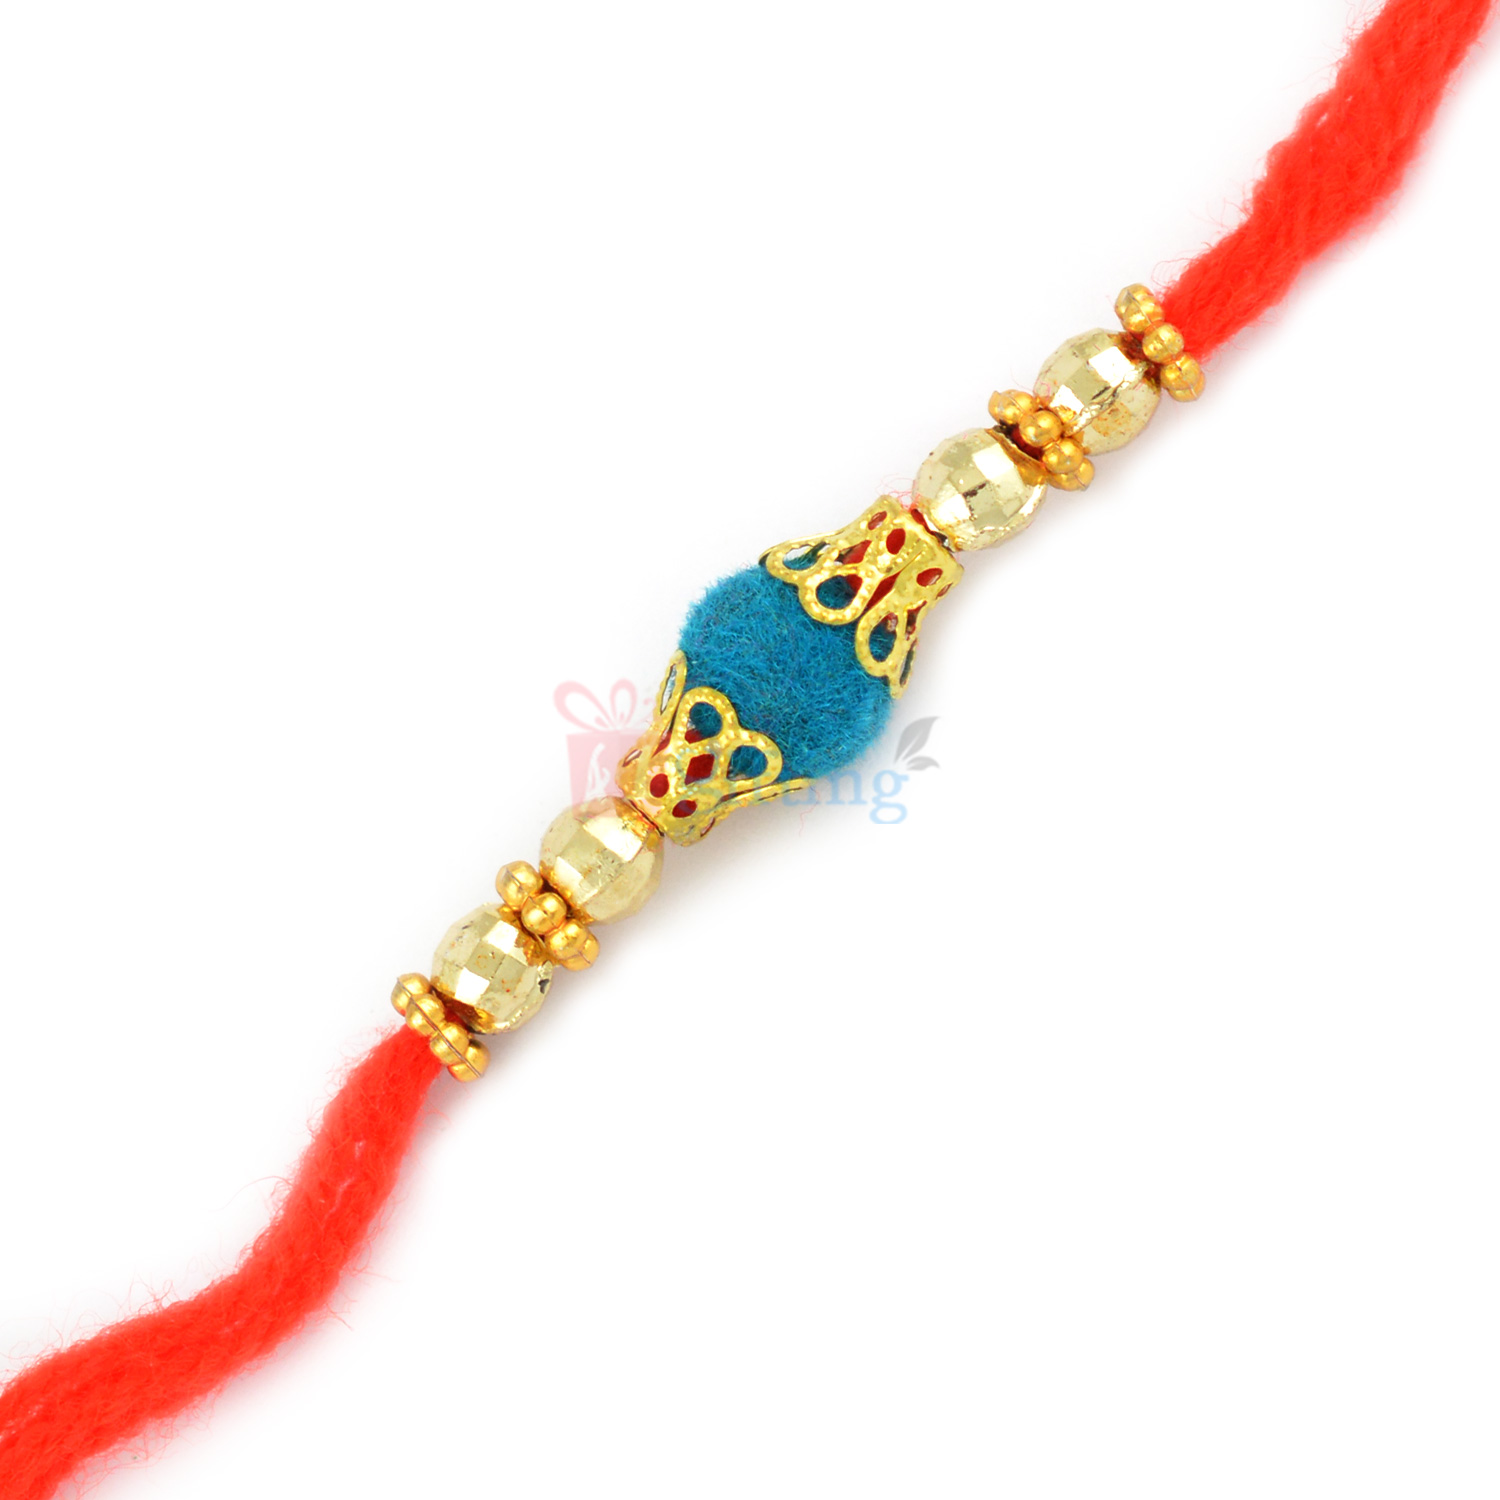 Awesome Central and Golden Beads Rakhi Thread